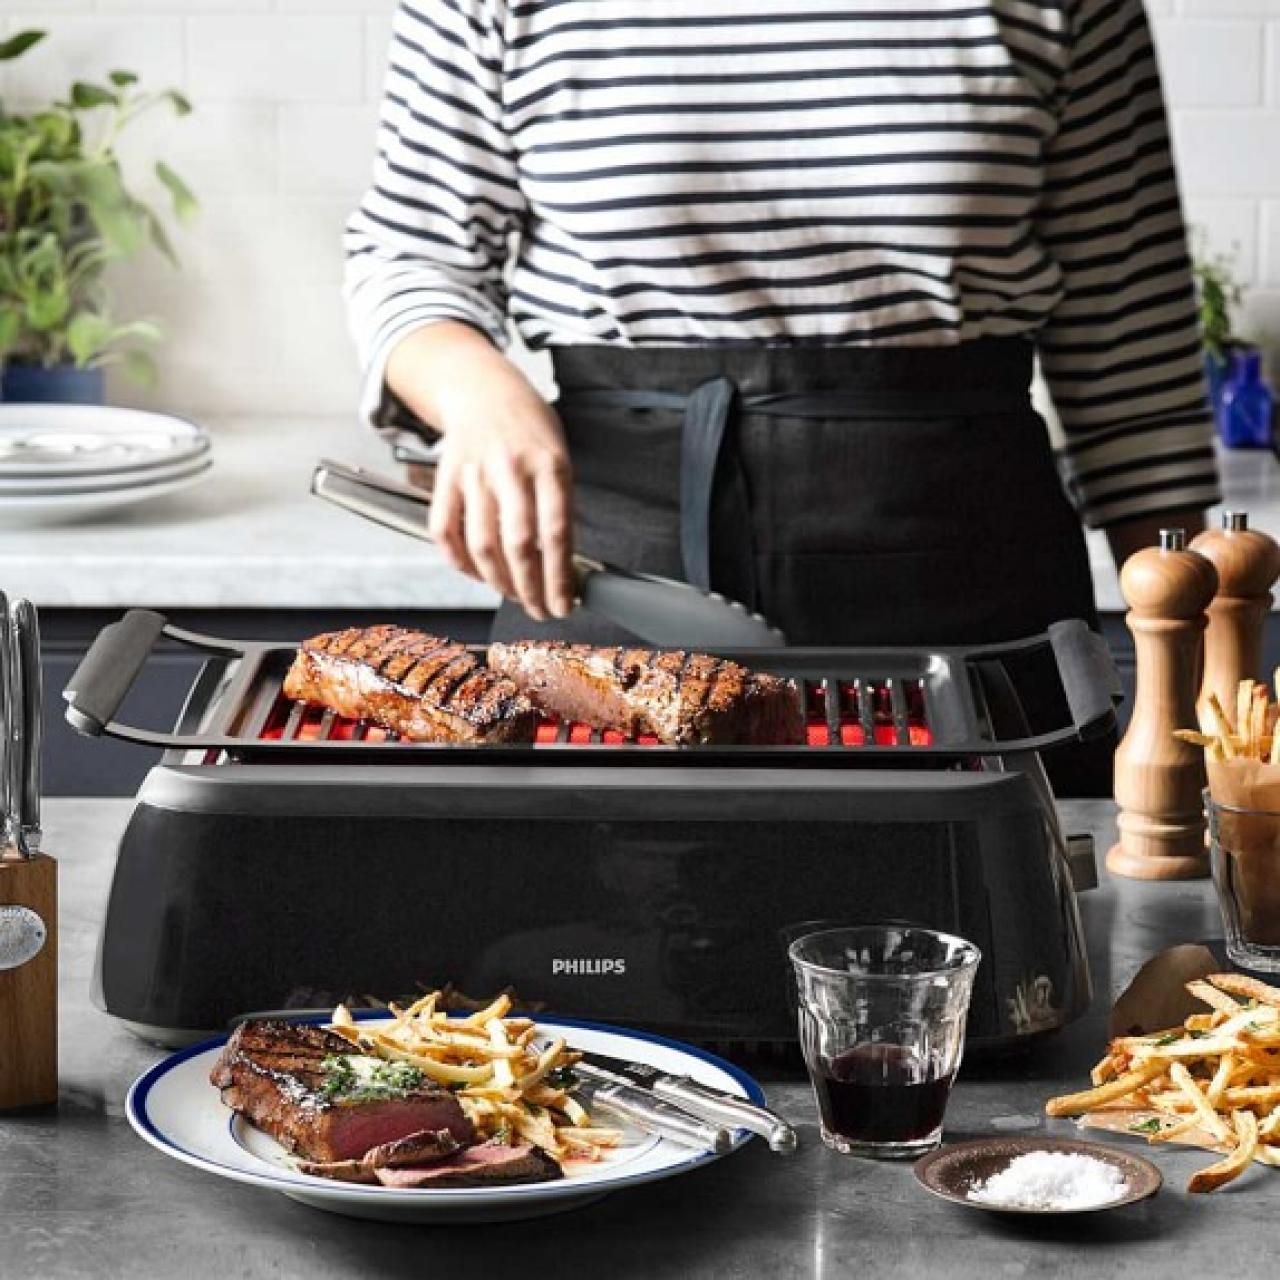 Philips Indoor Grill Is Almost Half Off at Williams Sonoma